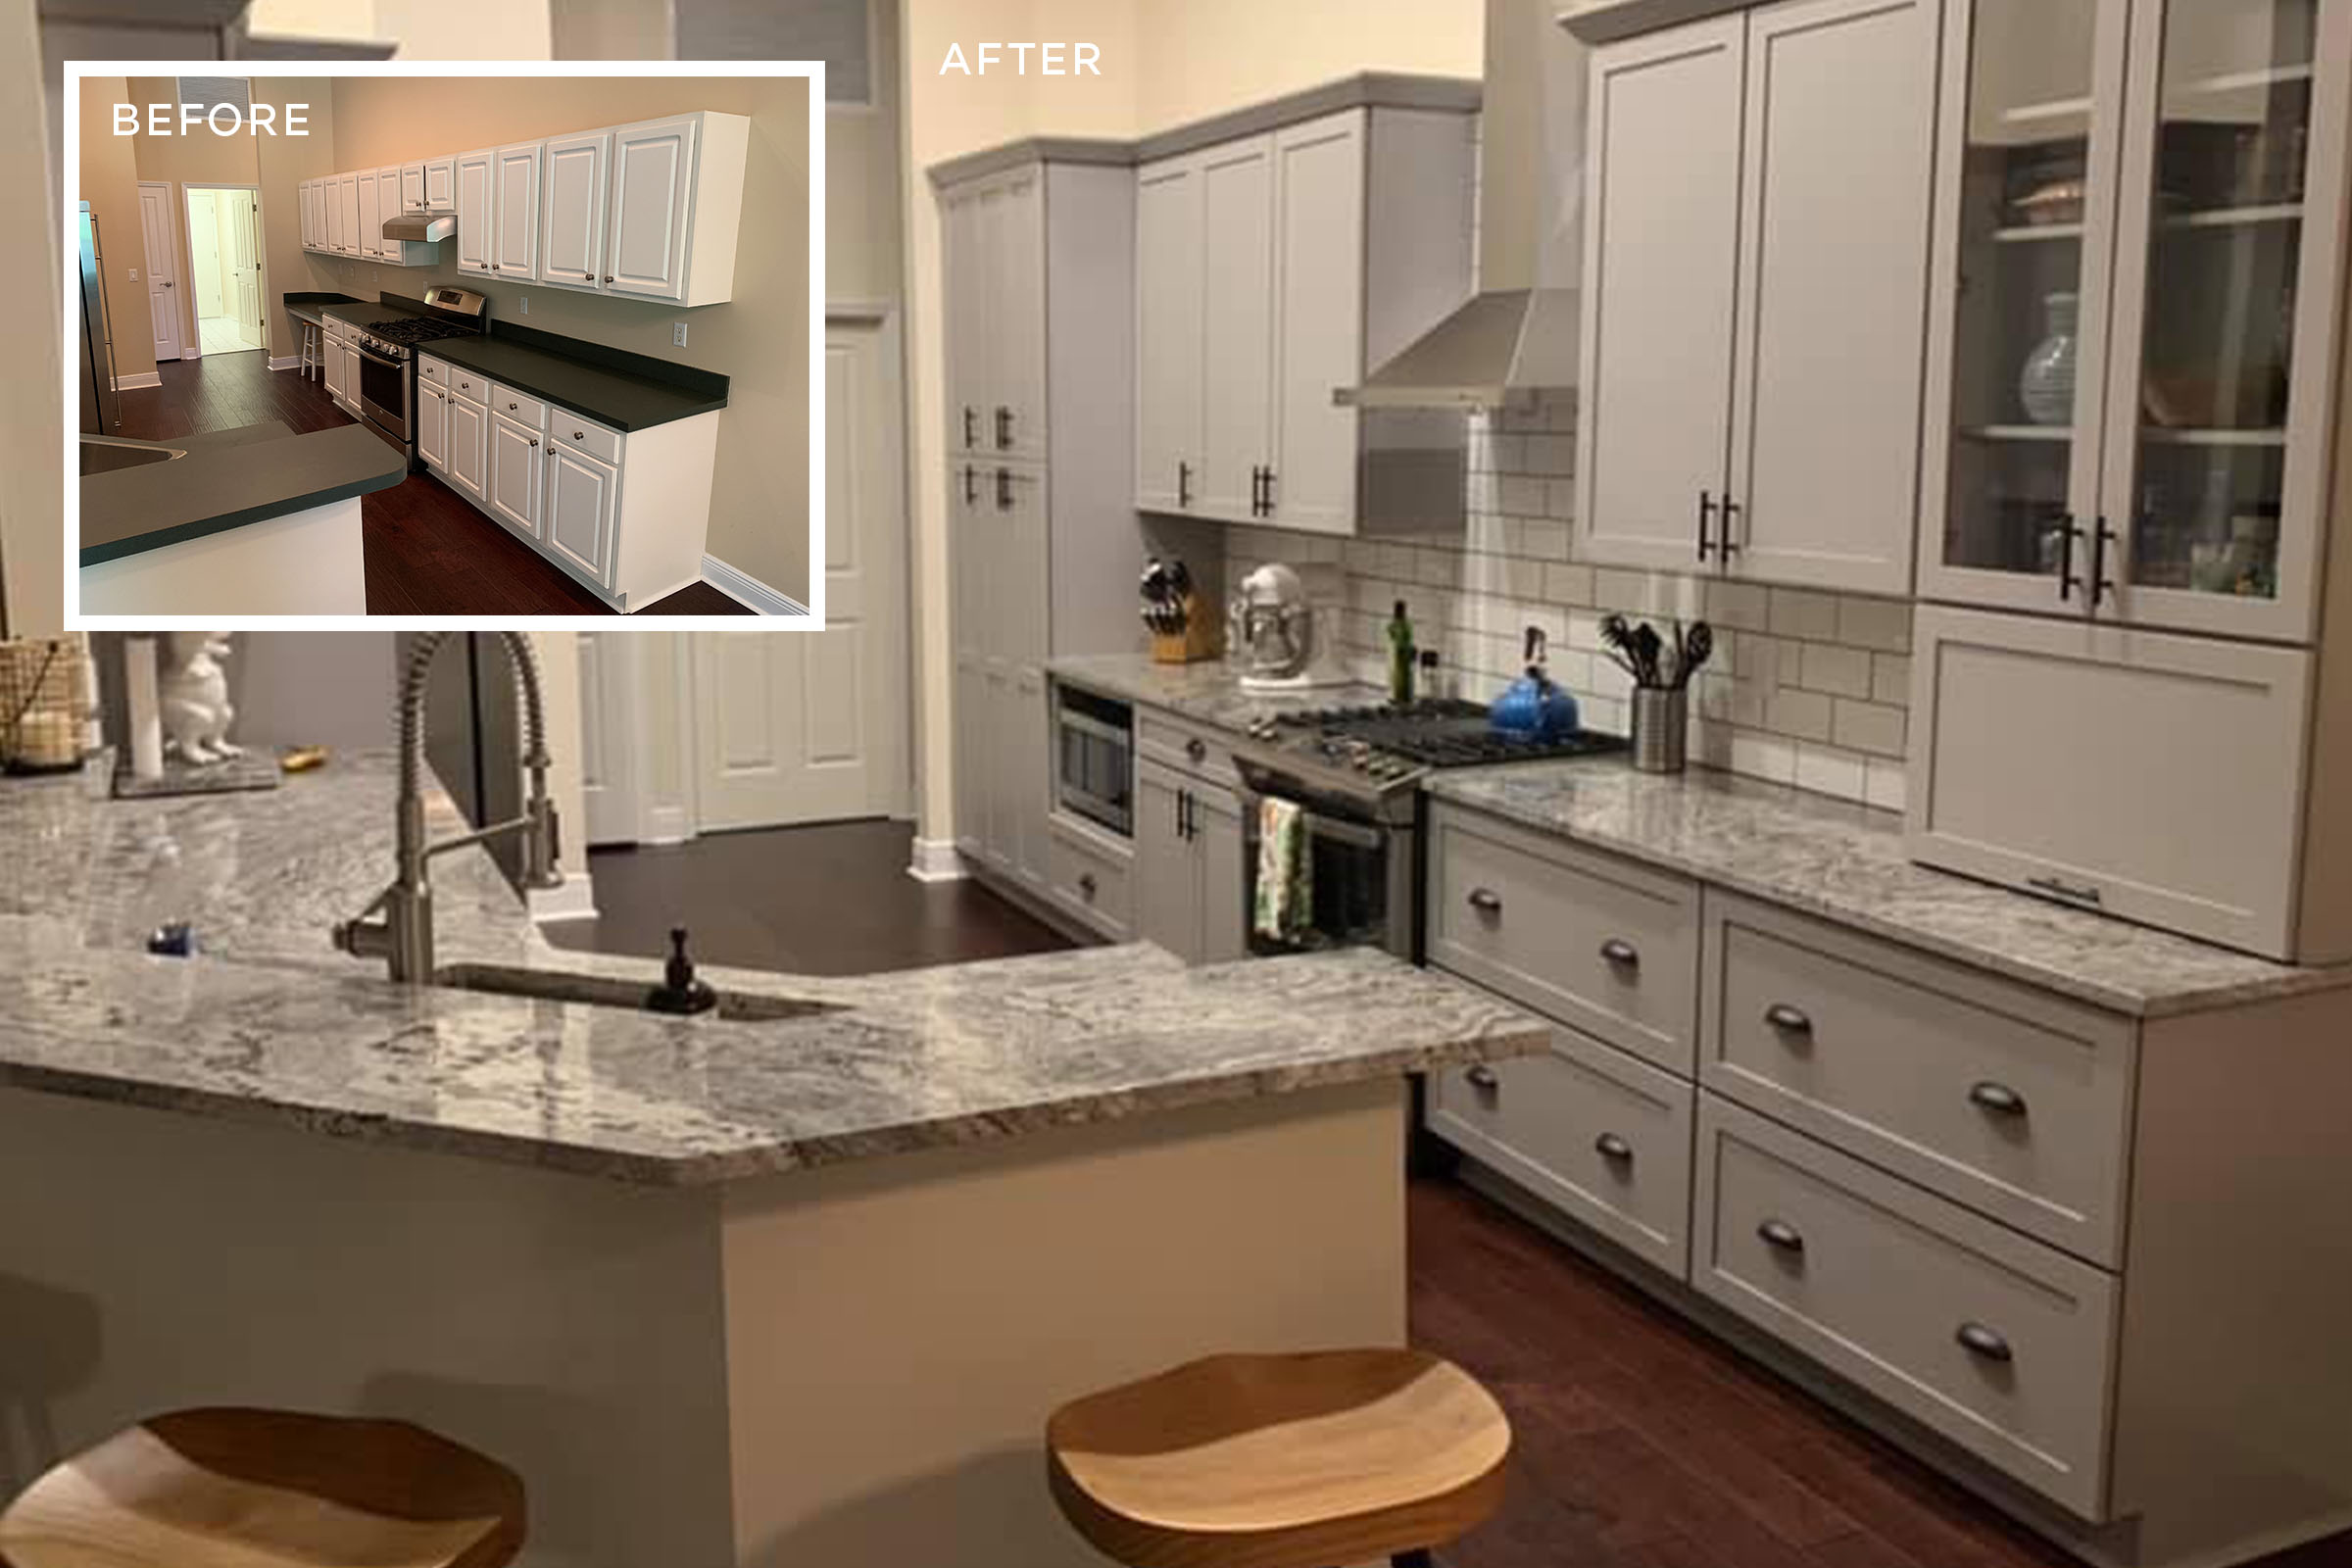 Kitchen remodel showing white builder-grade cabinets and laminate countertops upgraded to gray KraftMaid cabinets and natural stone countertops